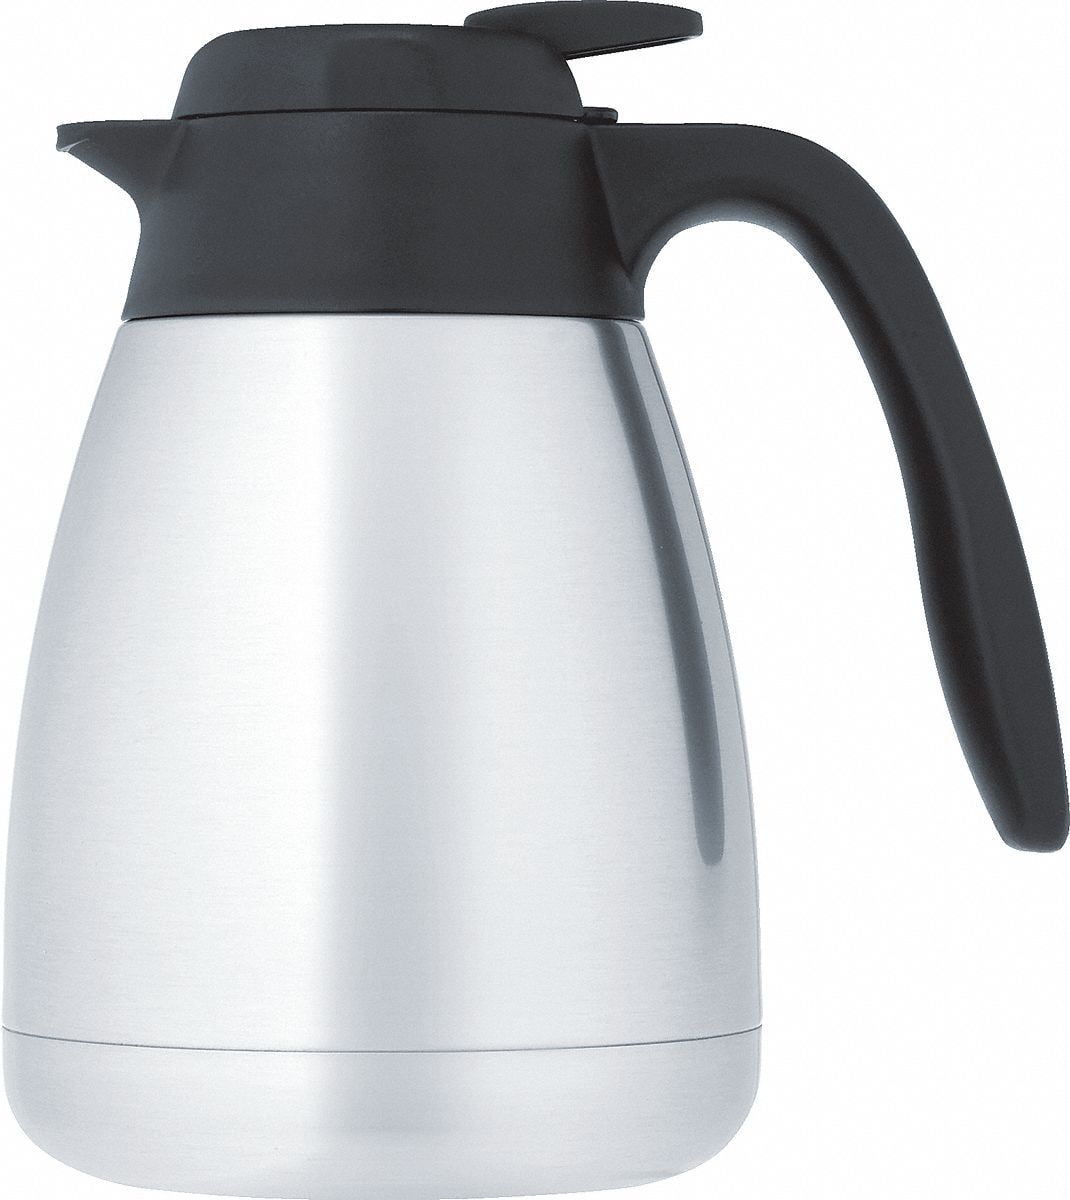 SALE: Thermal Carafe with Copper Finish and Insulated Stainless Steel Liner  (1 Liter, Keeps Hot/Cold 4-6 Hours)